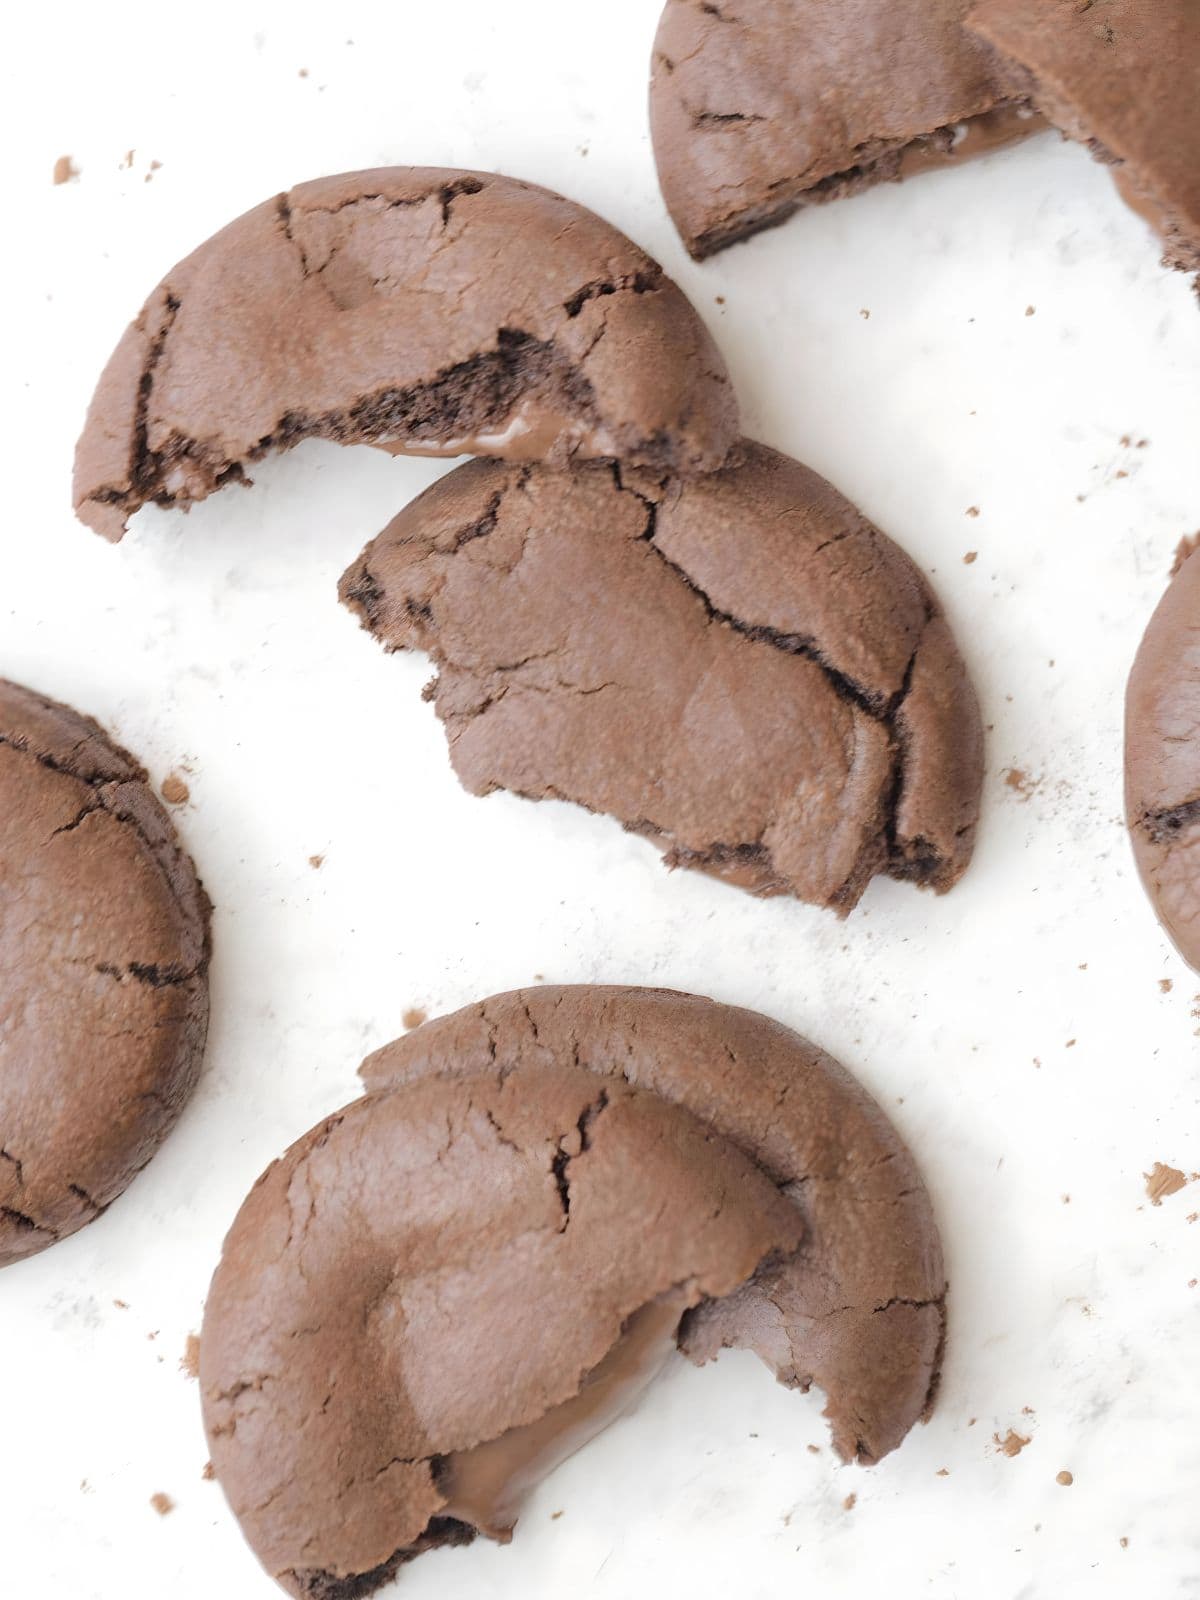 Nutella stuffed chocolate cookies filled with creamy Nutella.